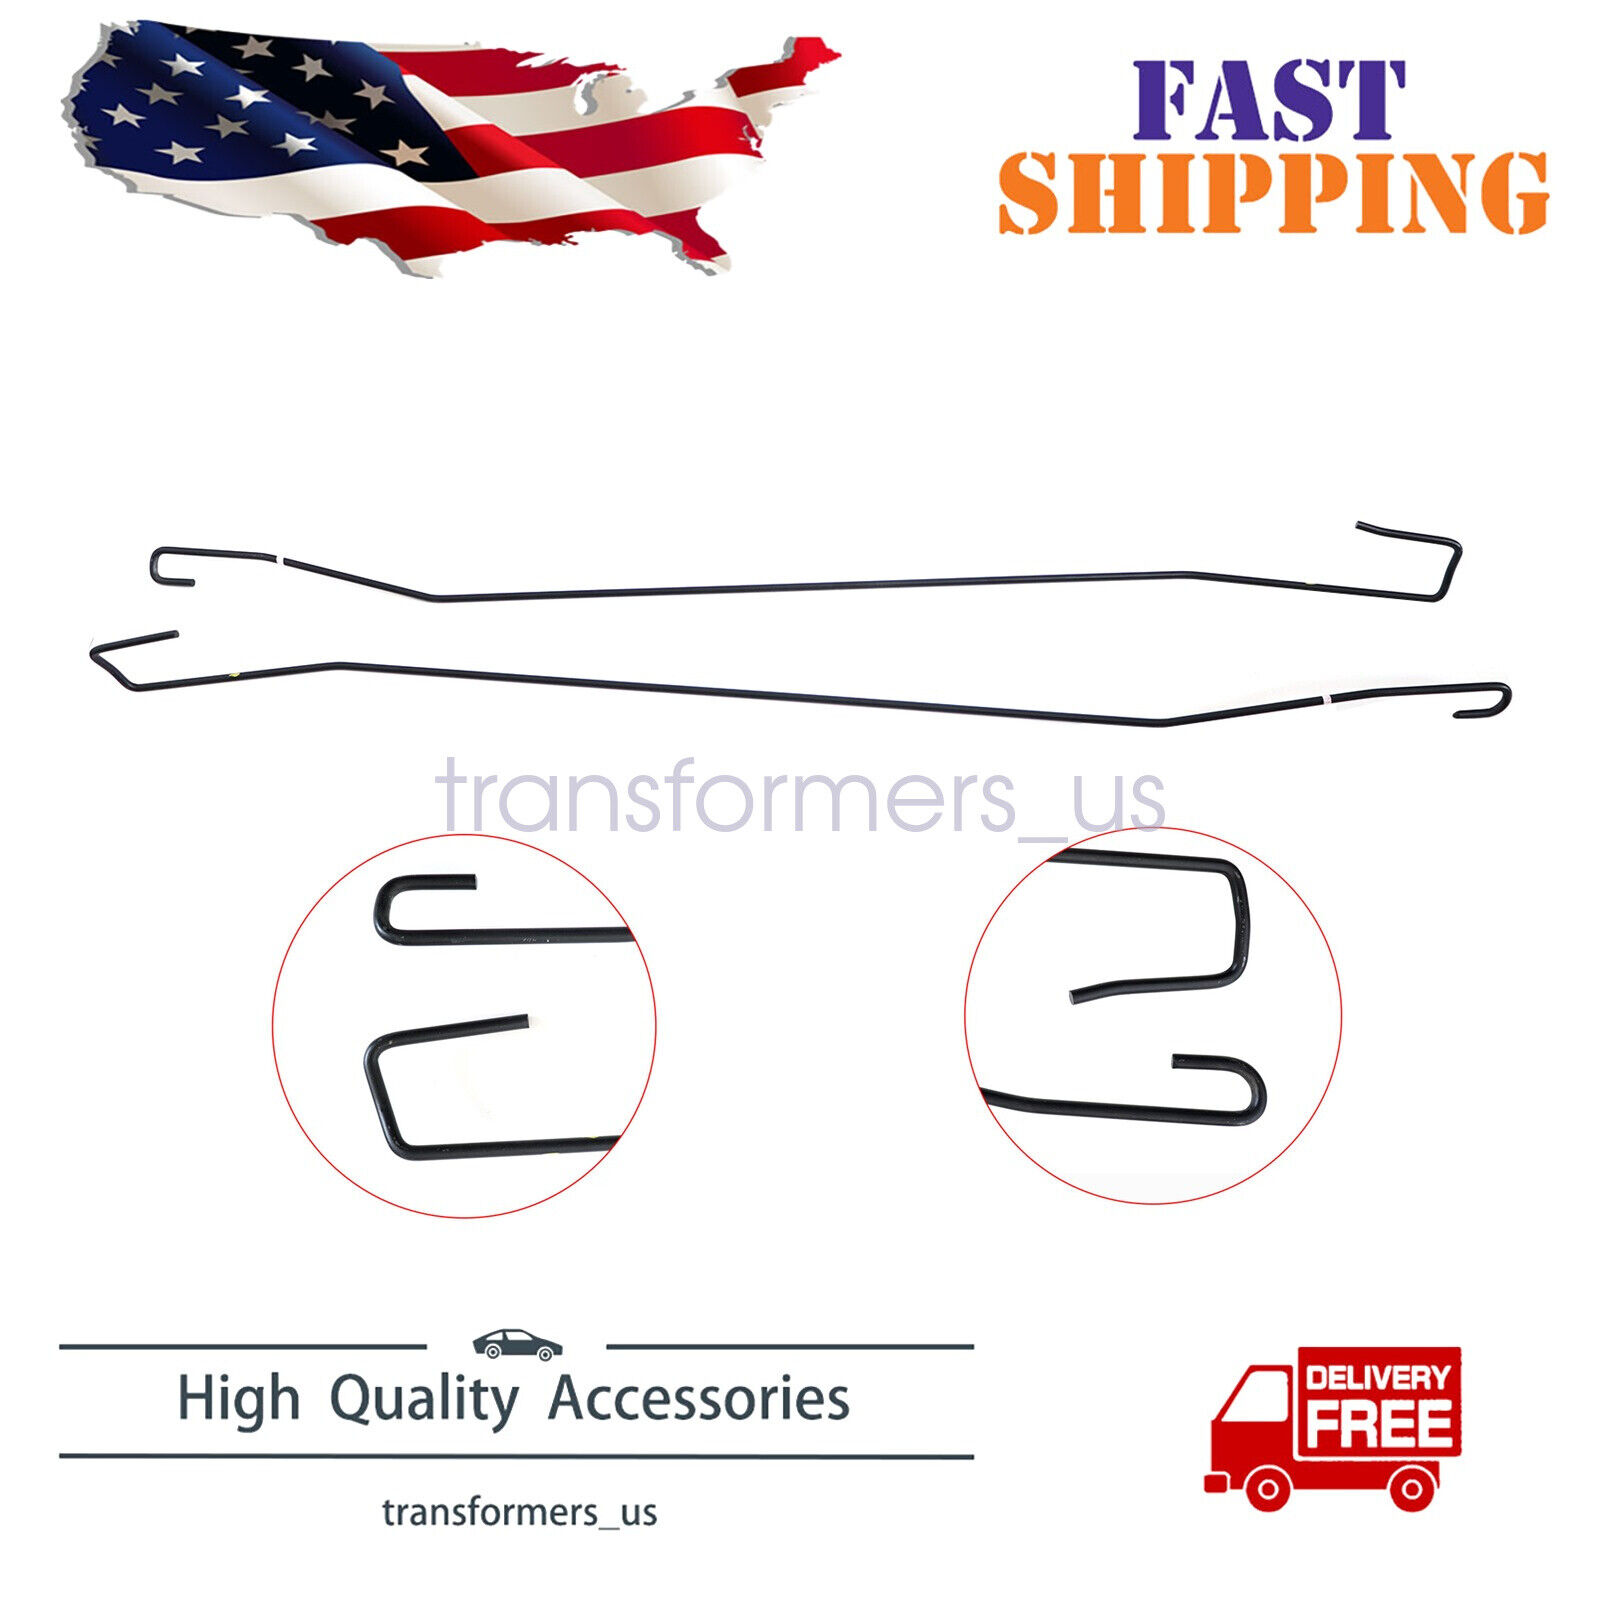 NEW Fit For Honda Accord 2008-2012 New Trunk Rear Lid Torsion Spring LH+RH US